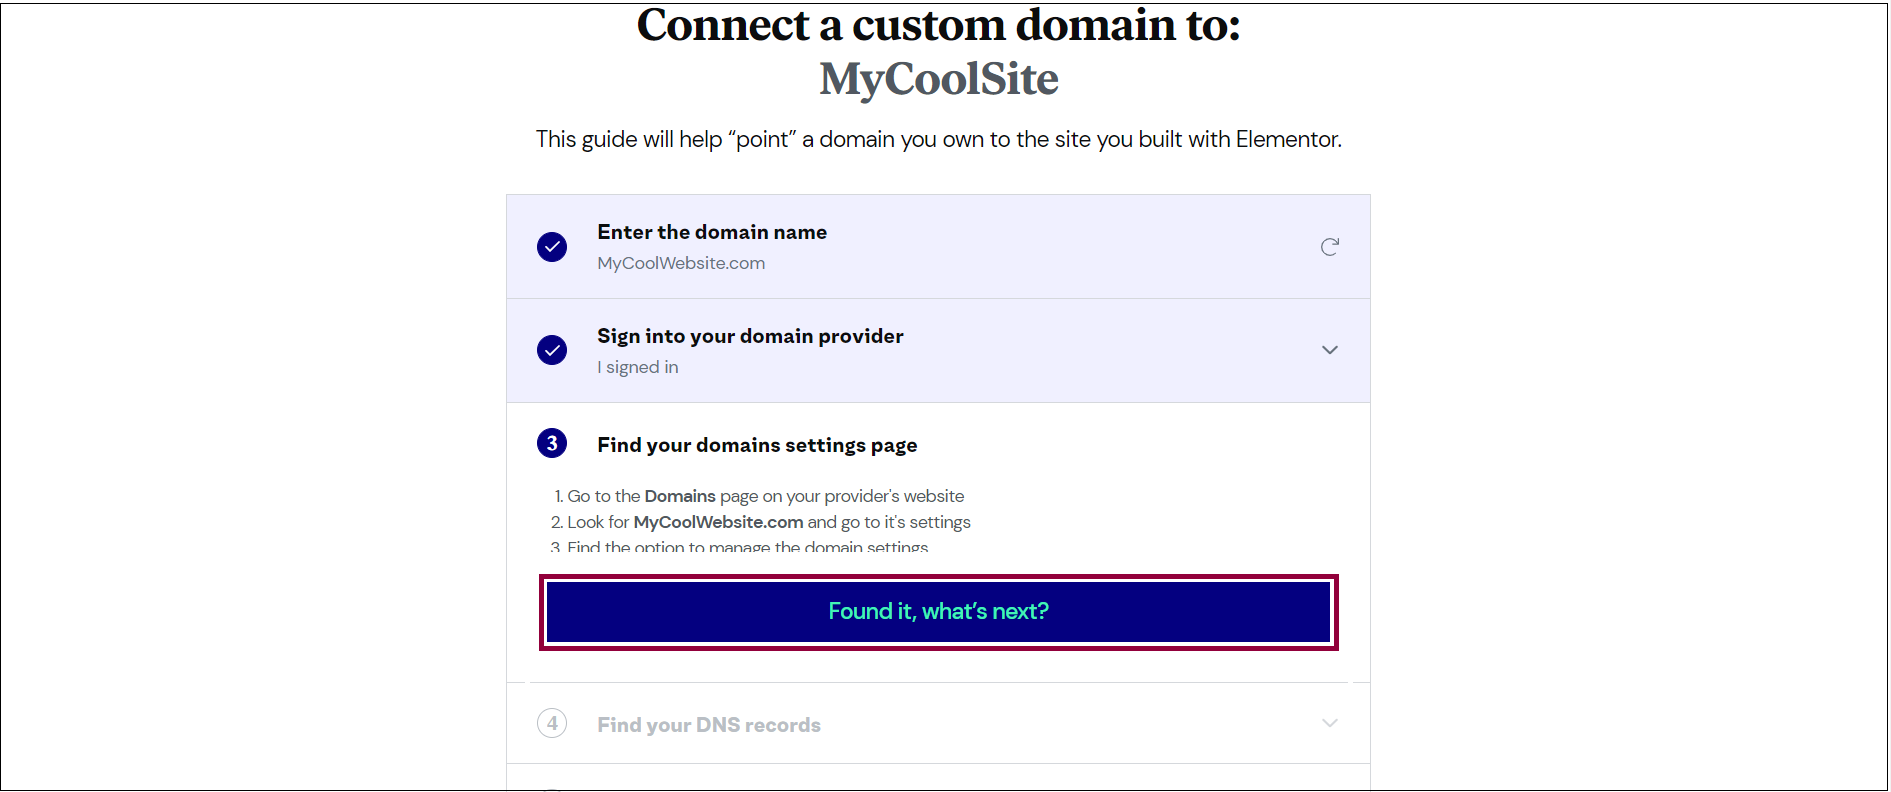 5 Connect a custom domain redder Connect your Bluehost domain 17